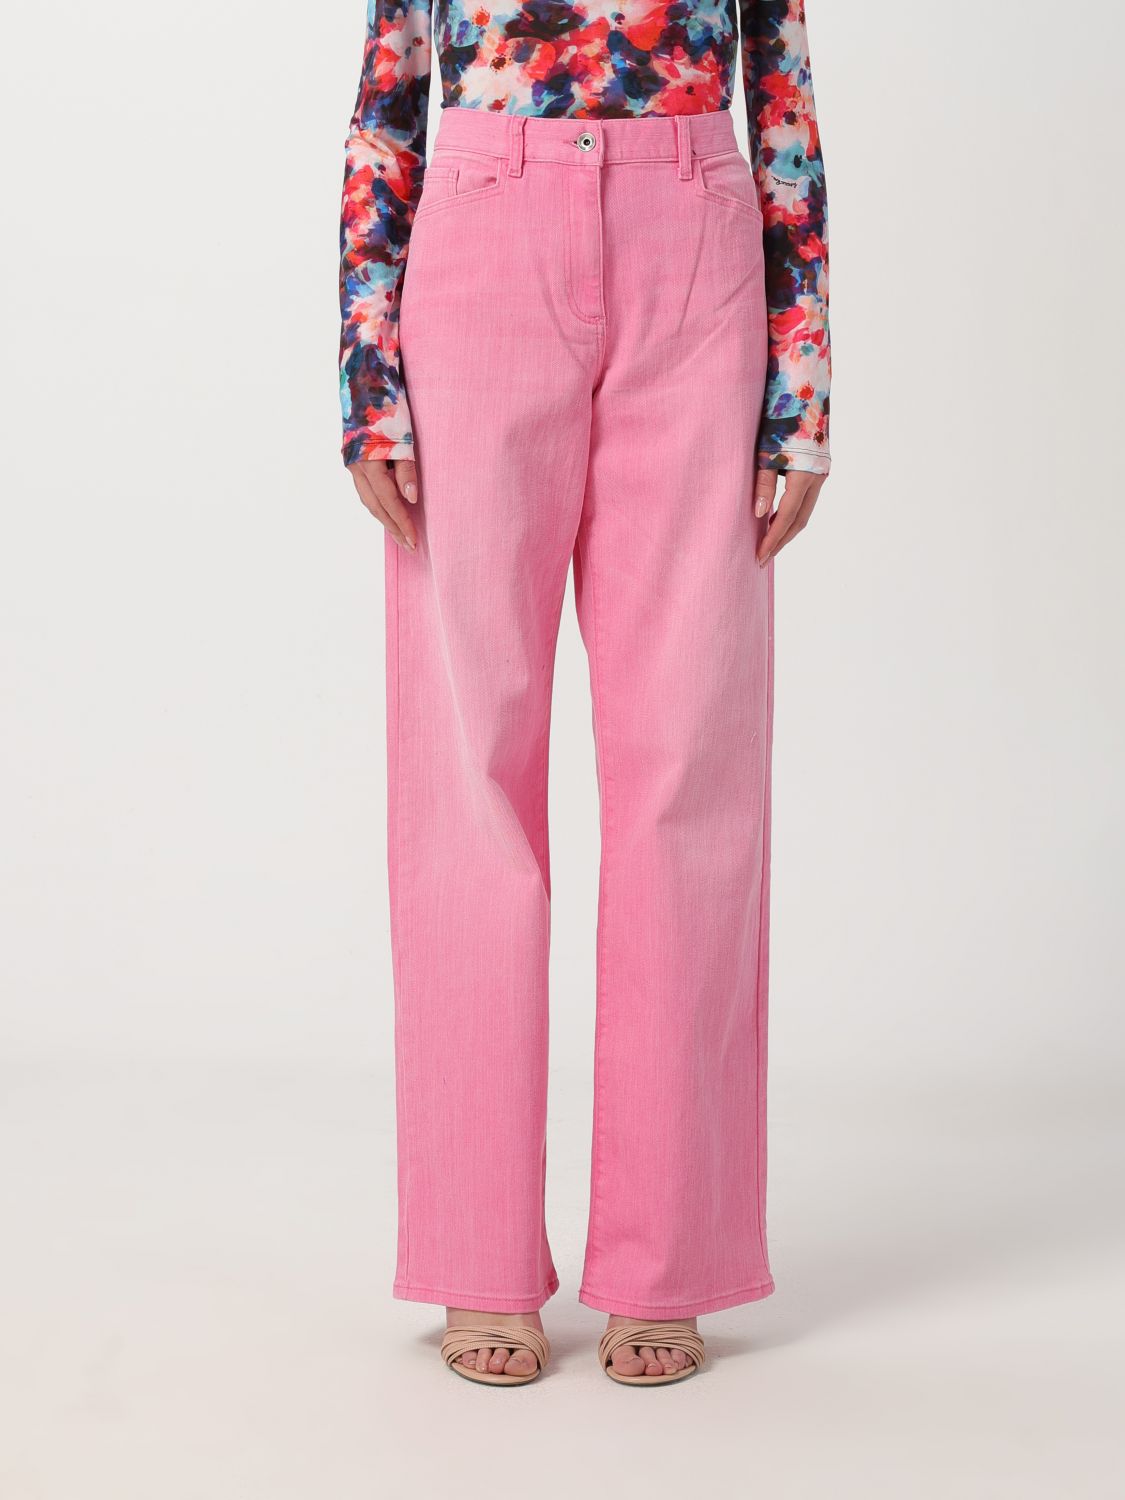 Patrizia Pepe Jeans  Woman In Pink